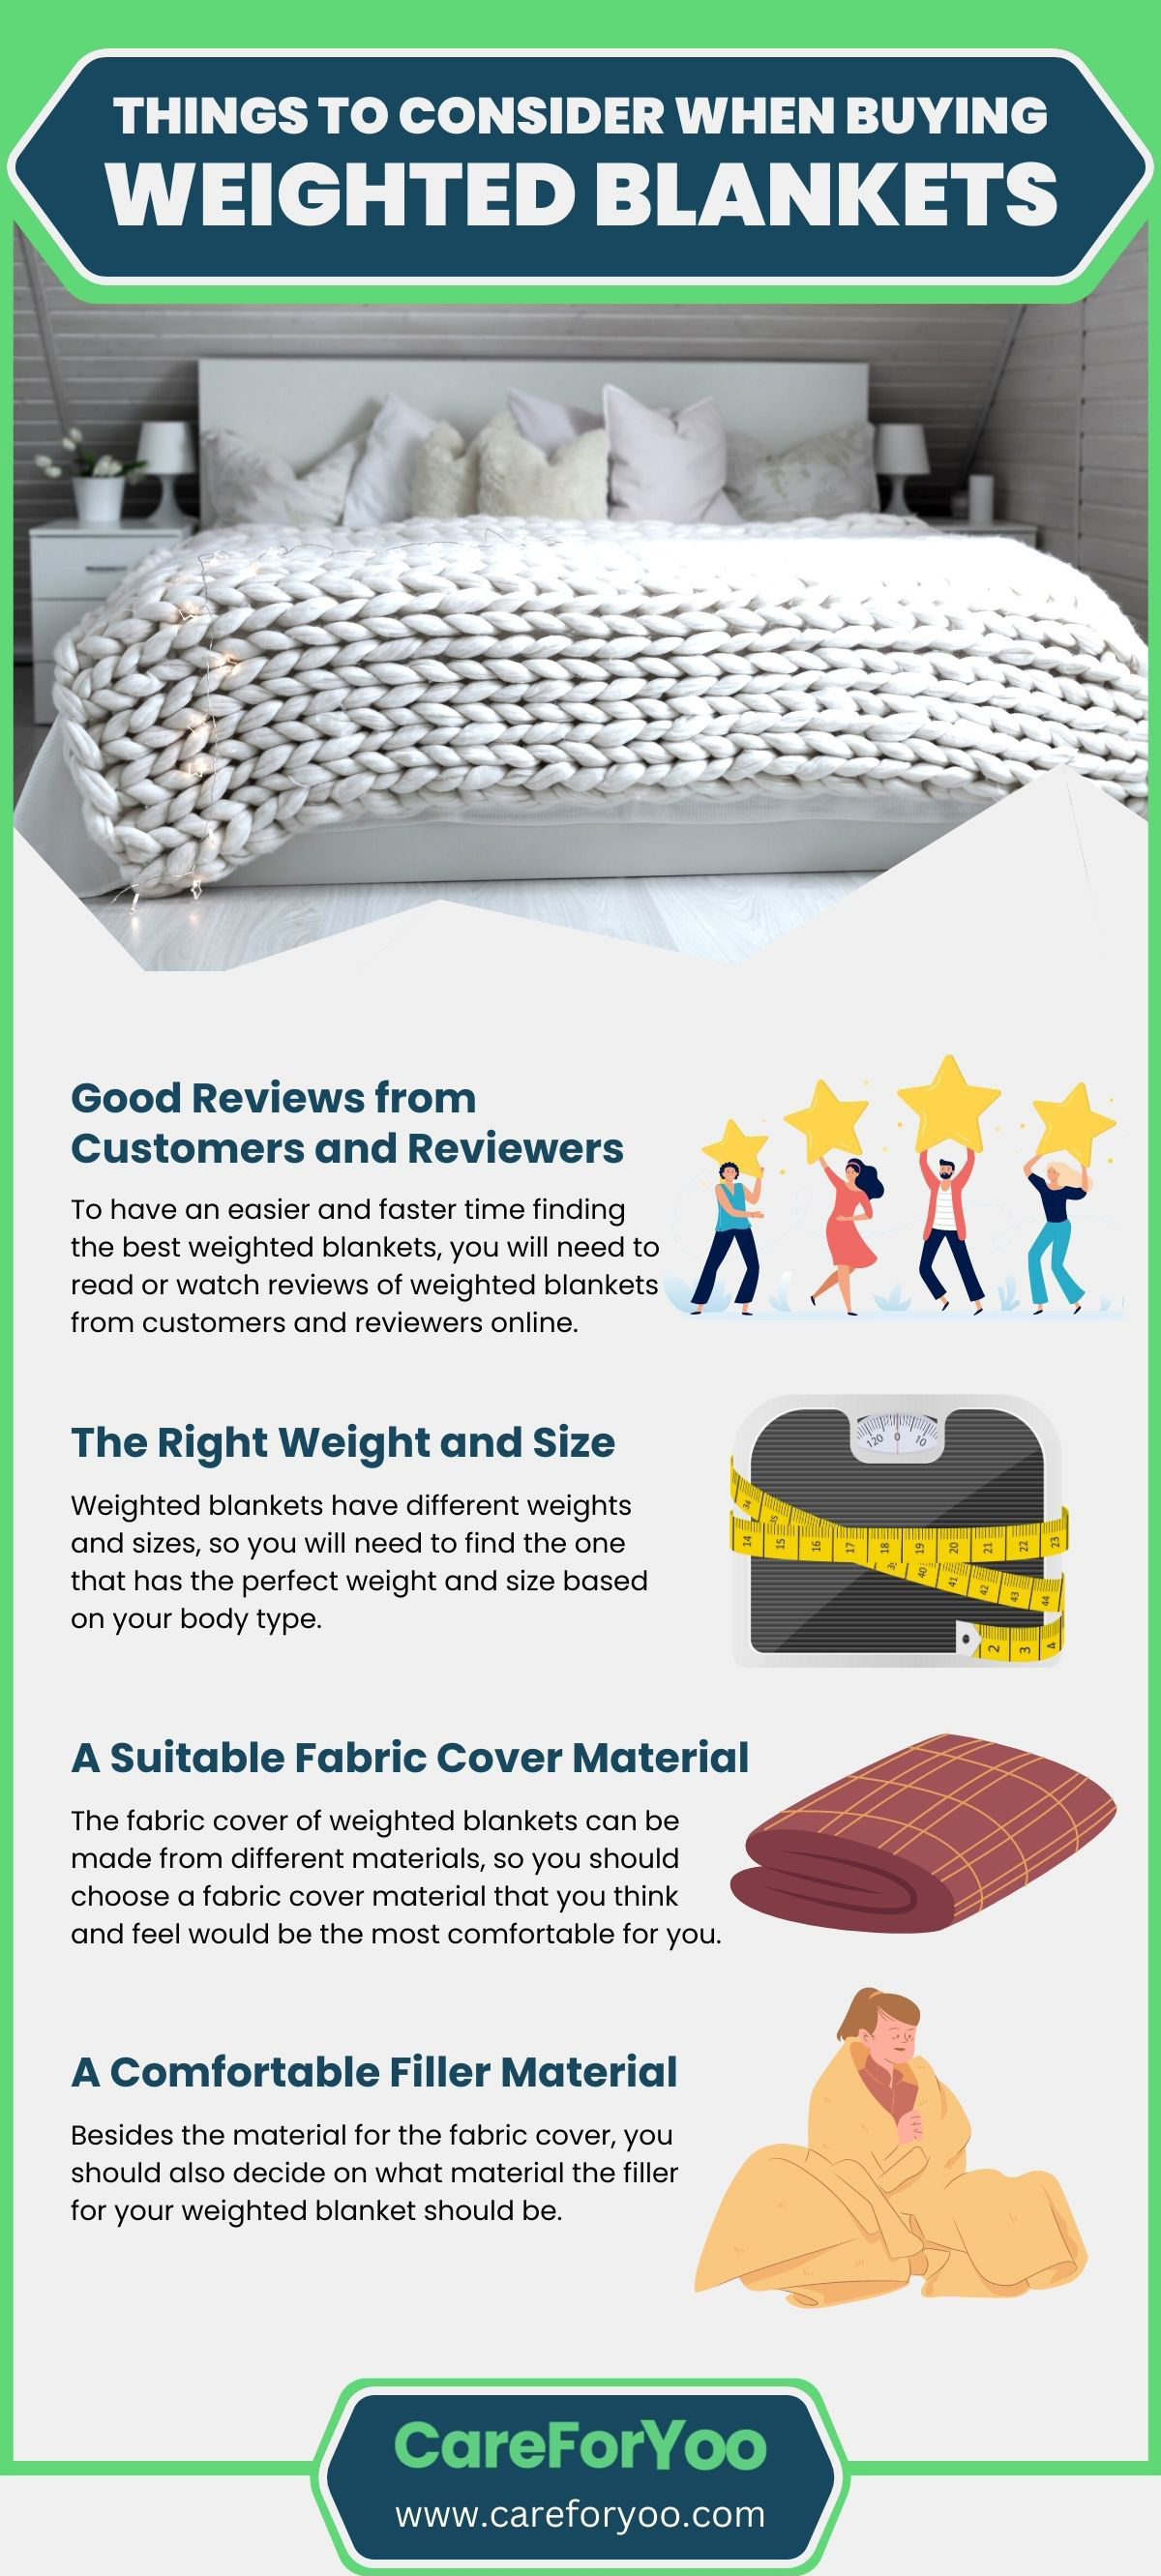 Things to Consider When Buying Weighted Blankets